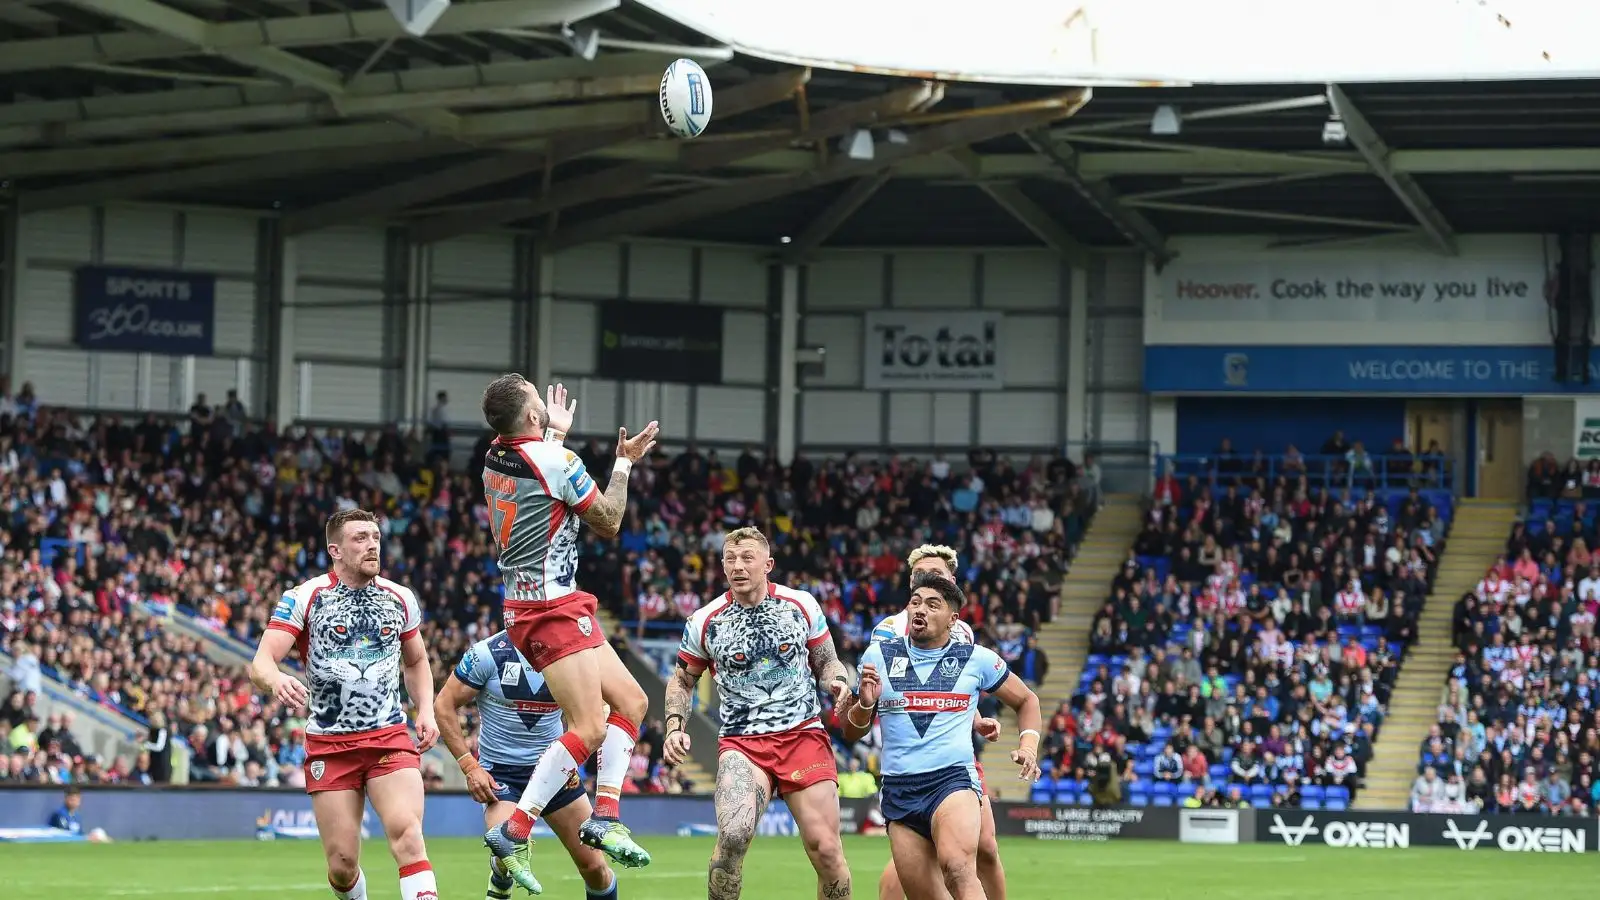 Leigh Leopards v St Helens in the Challenge Cup semi-final